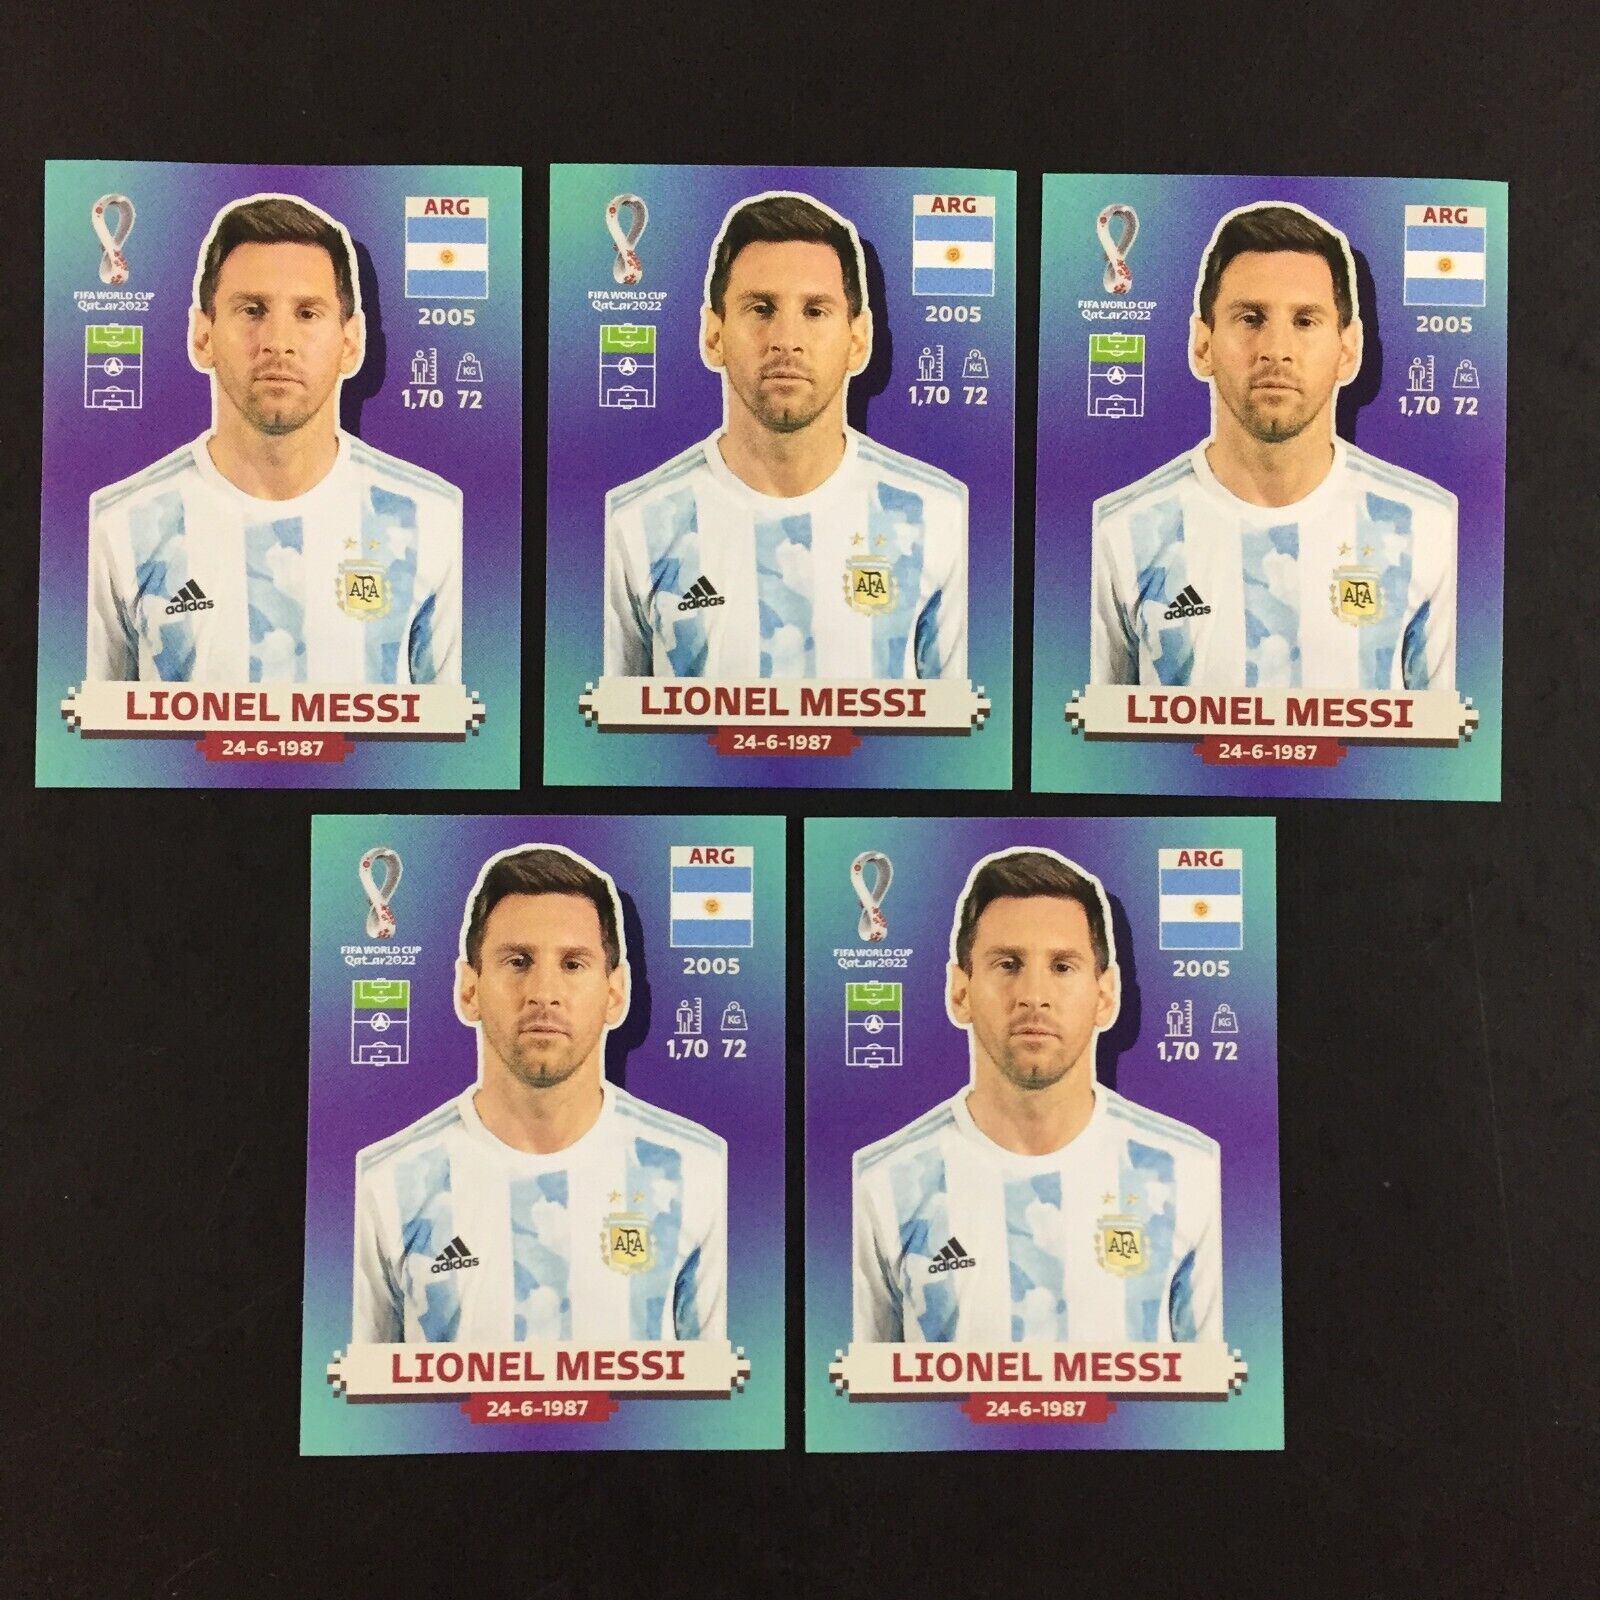 Lionel Messi Lot of 5 Panini World Cup Qatar 2022 Stickers / #ARG 20